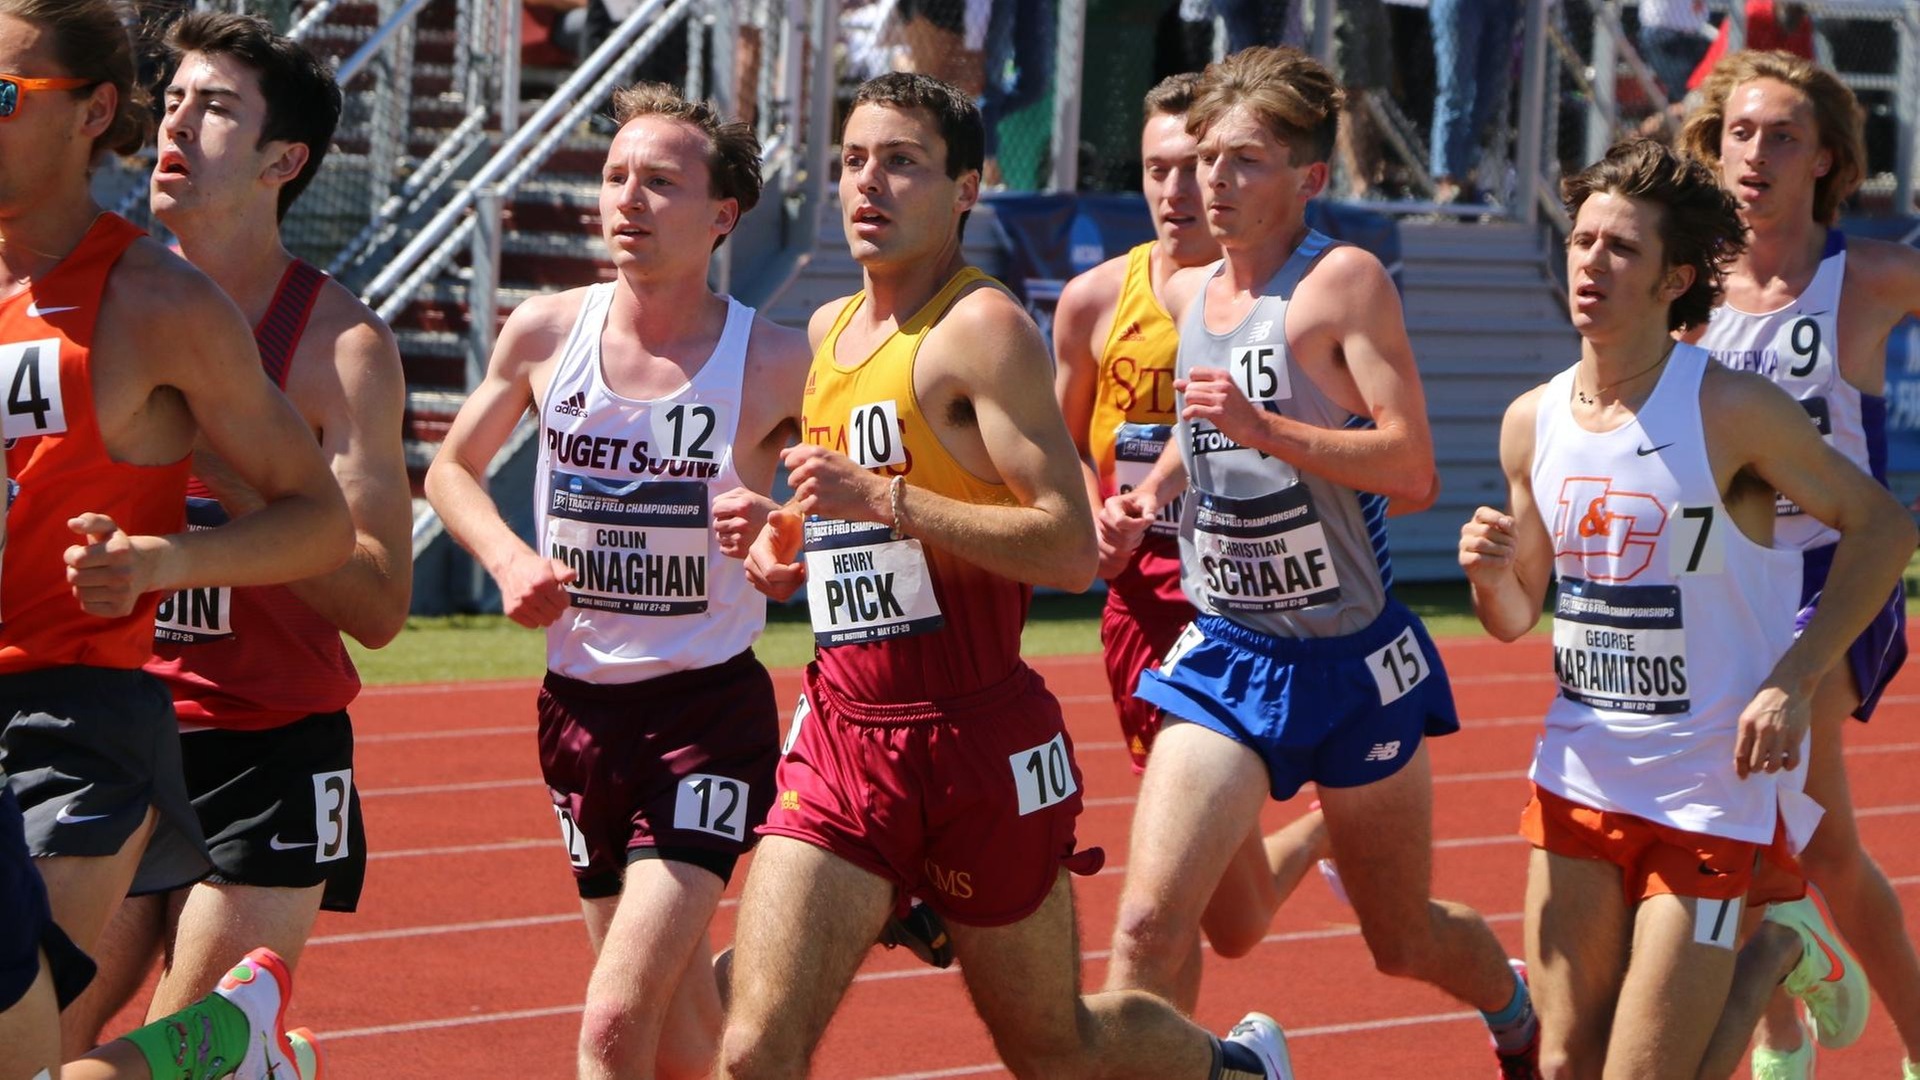 Henry Pick had top-5 NCAA finishes in both the fall and spring